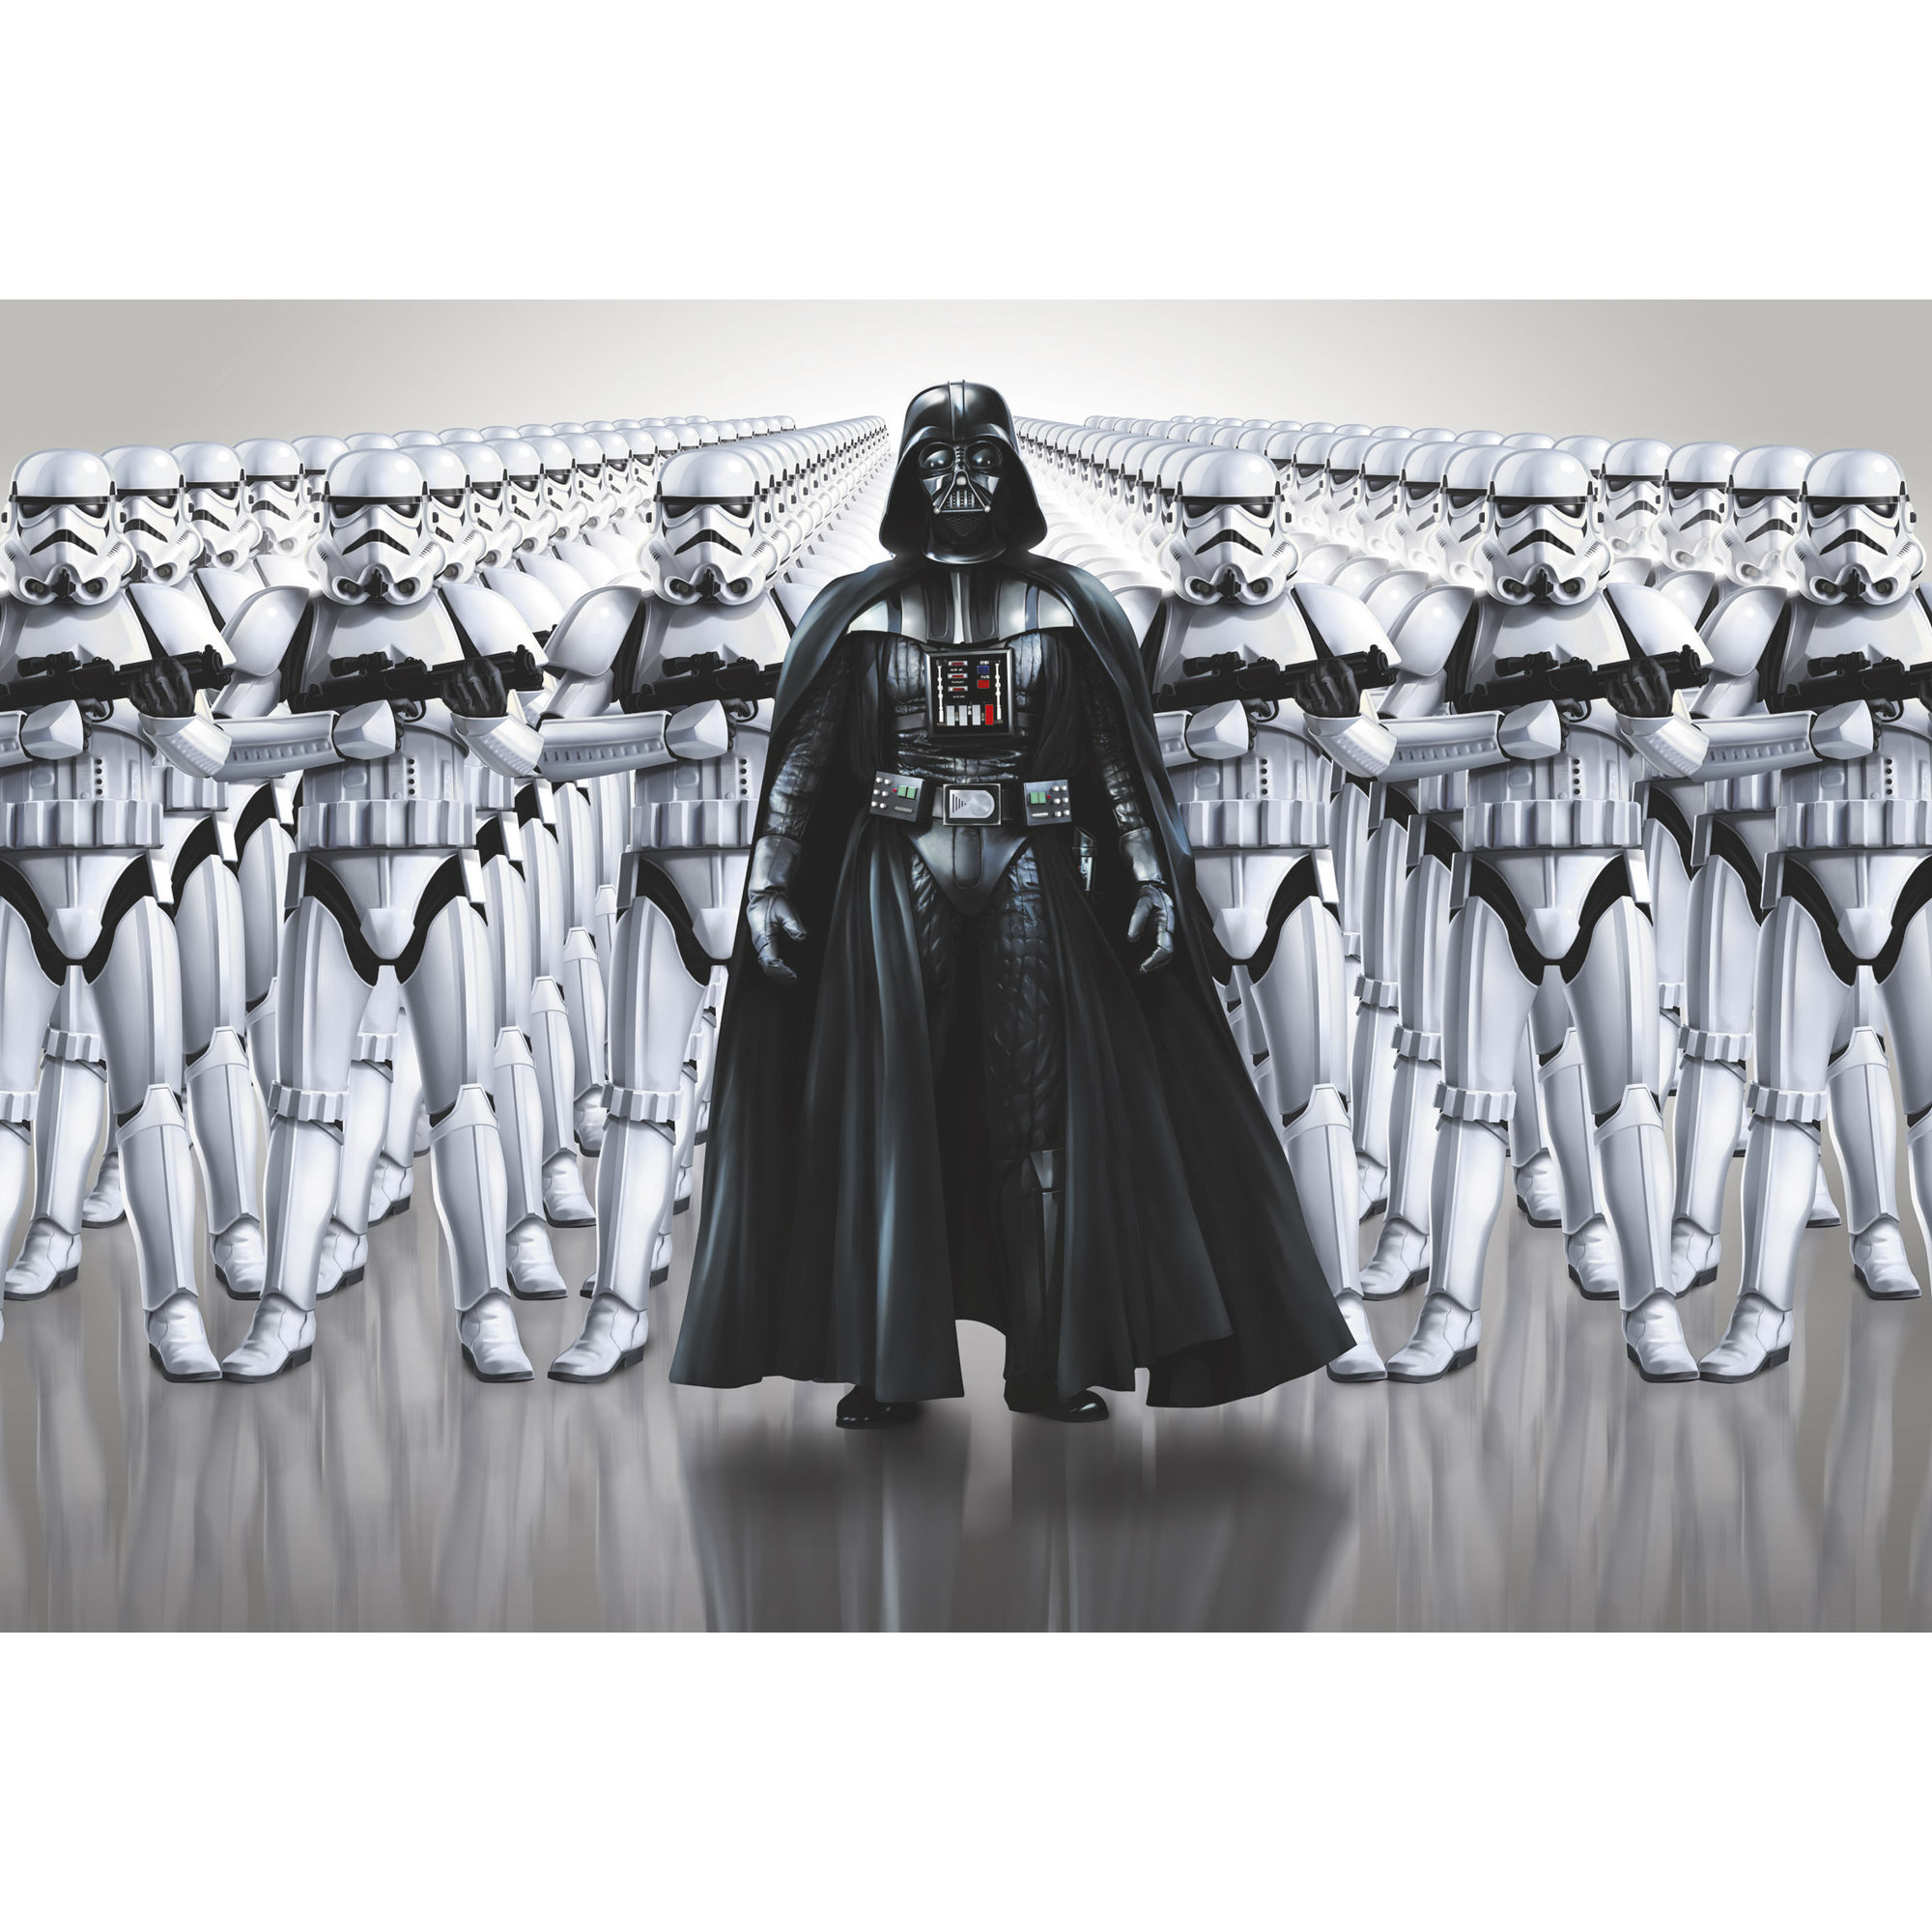 Fototapete 'Star Wars Imperial Force' 368 x 254 cm + product picture